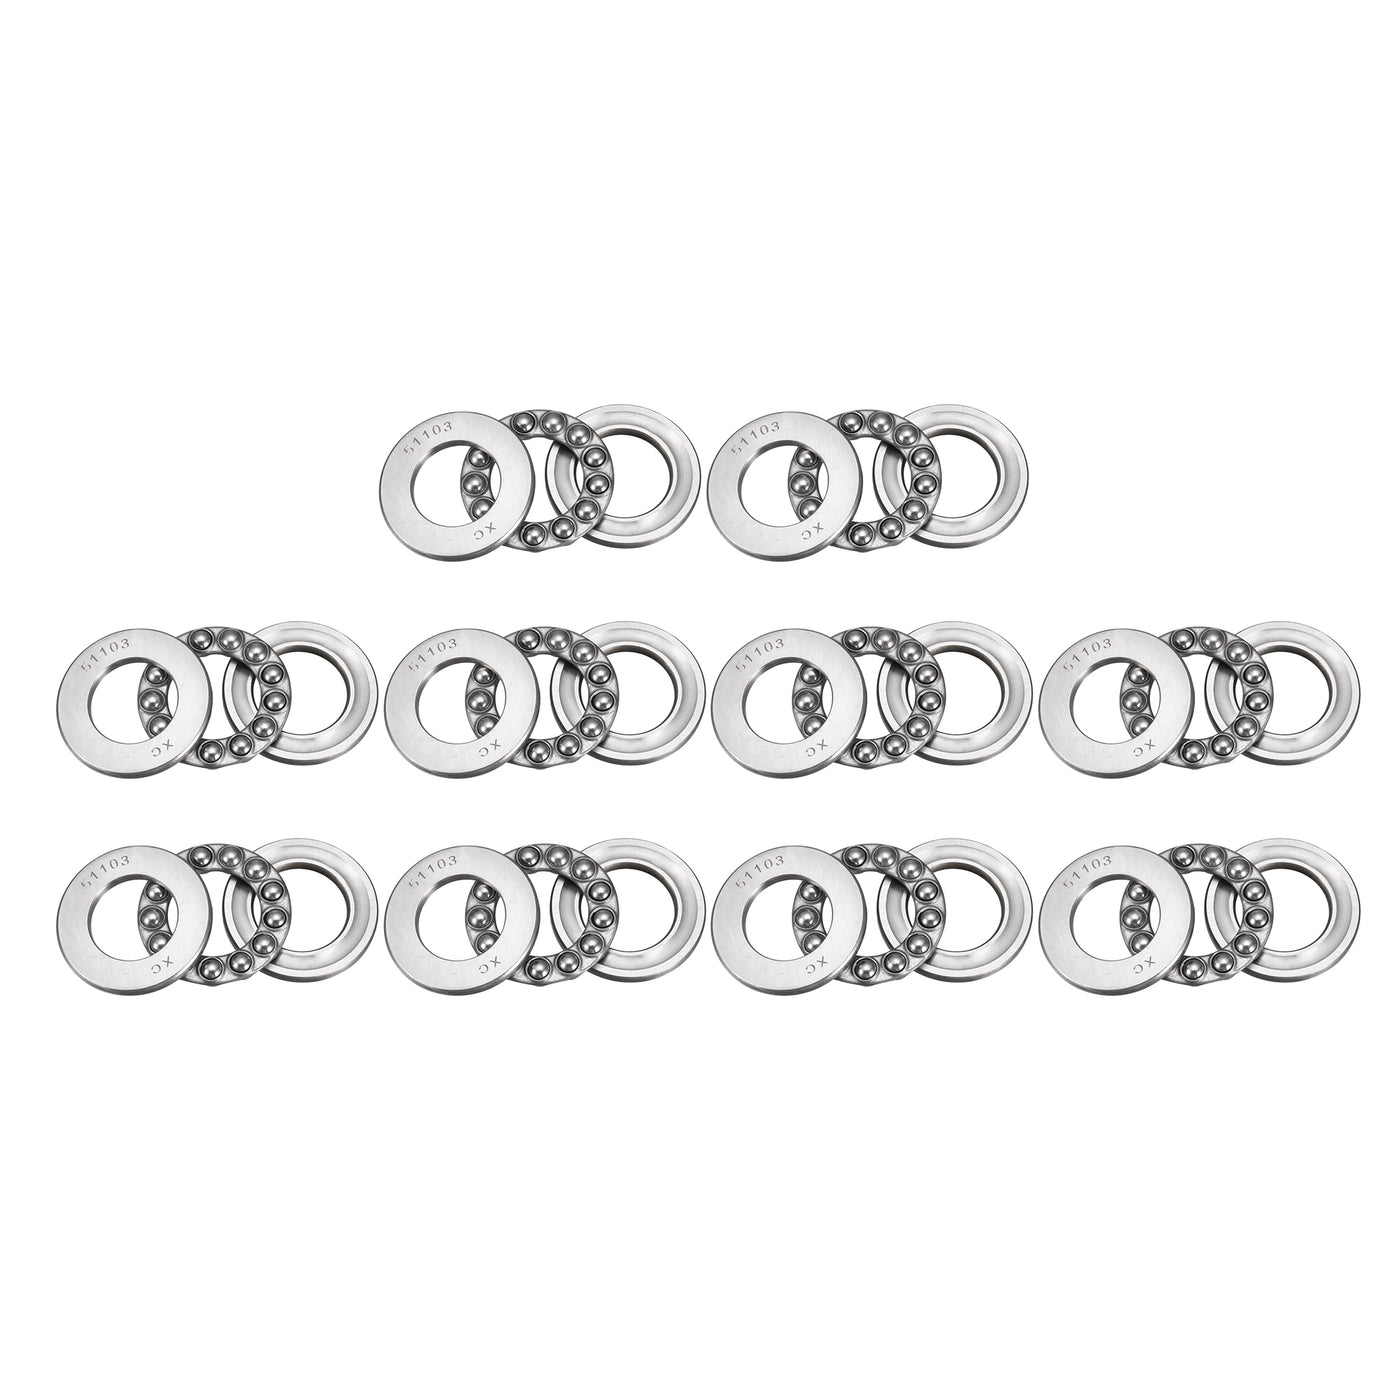 uxcell Uxcell 51103 Miniature Thrust Ball Bearing 17x30x9mm Chrome Steel with Washer 10pcs